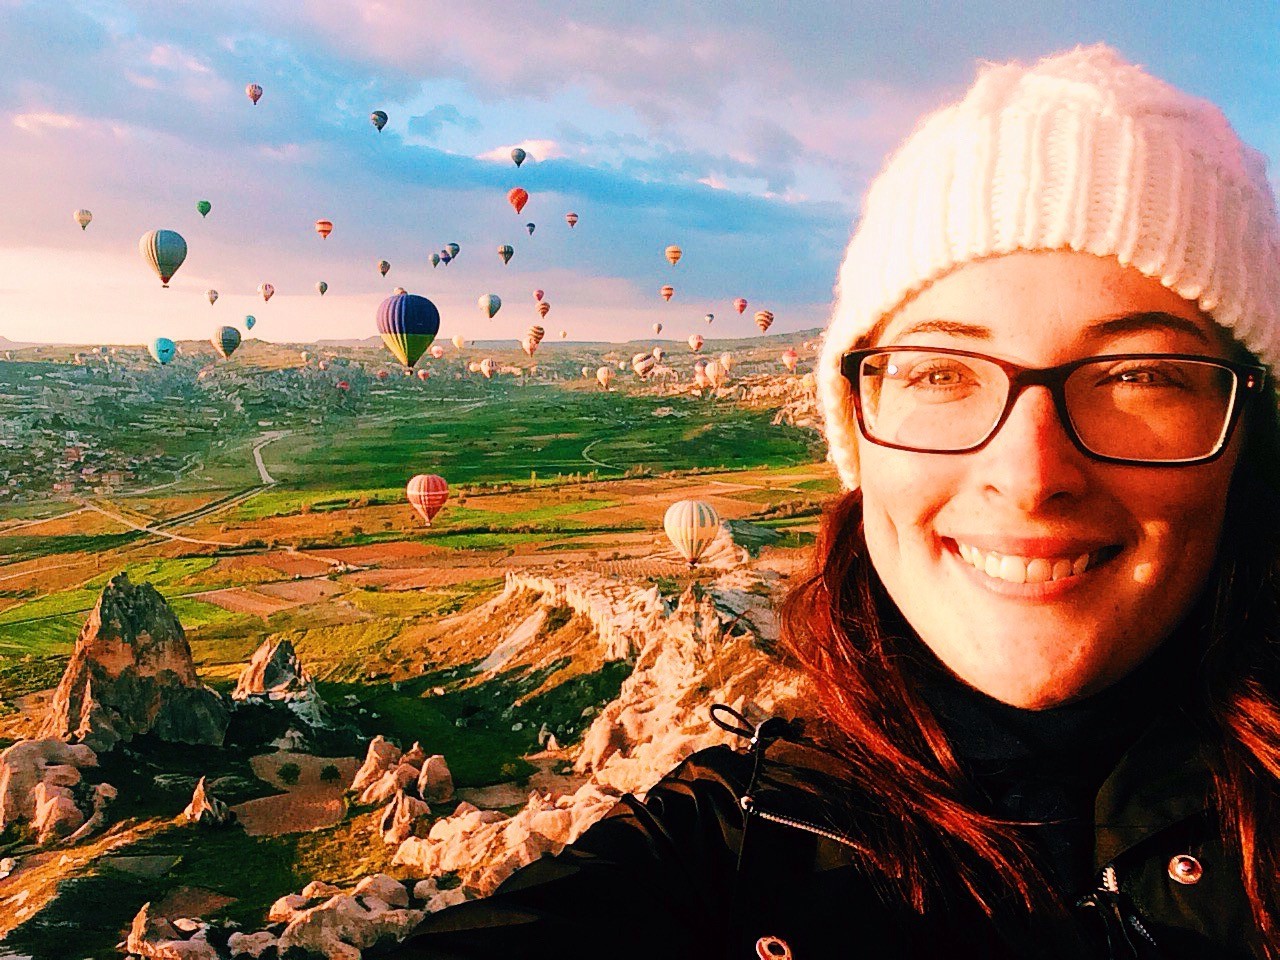 woman on hot air balloon ride t20 knKv22